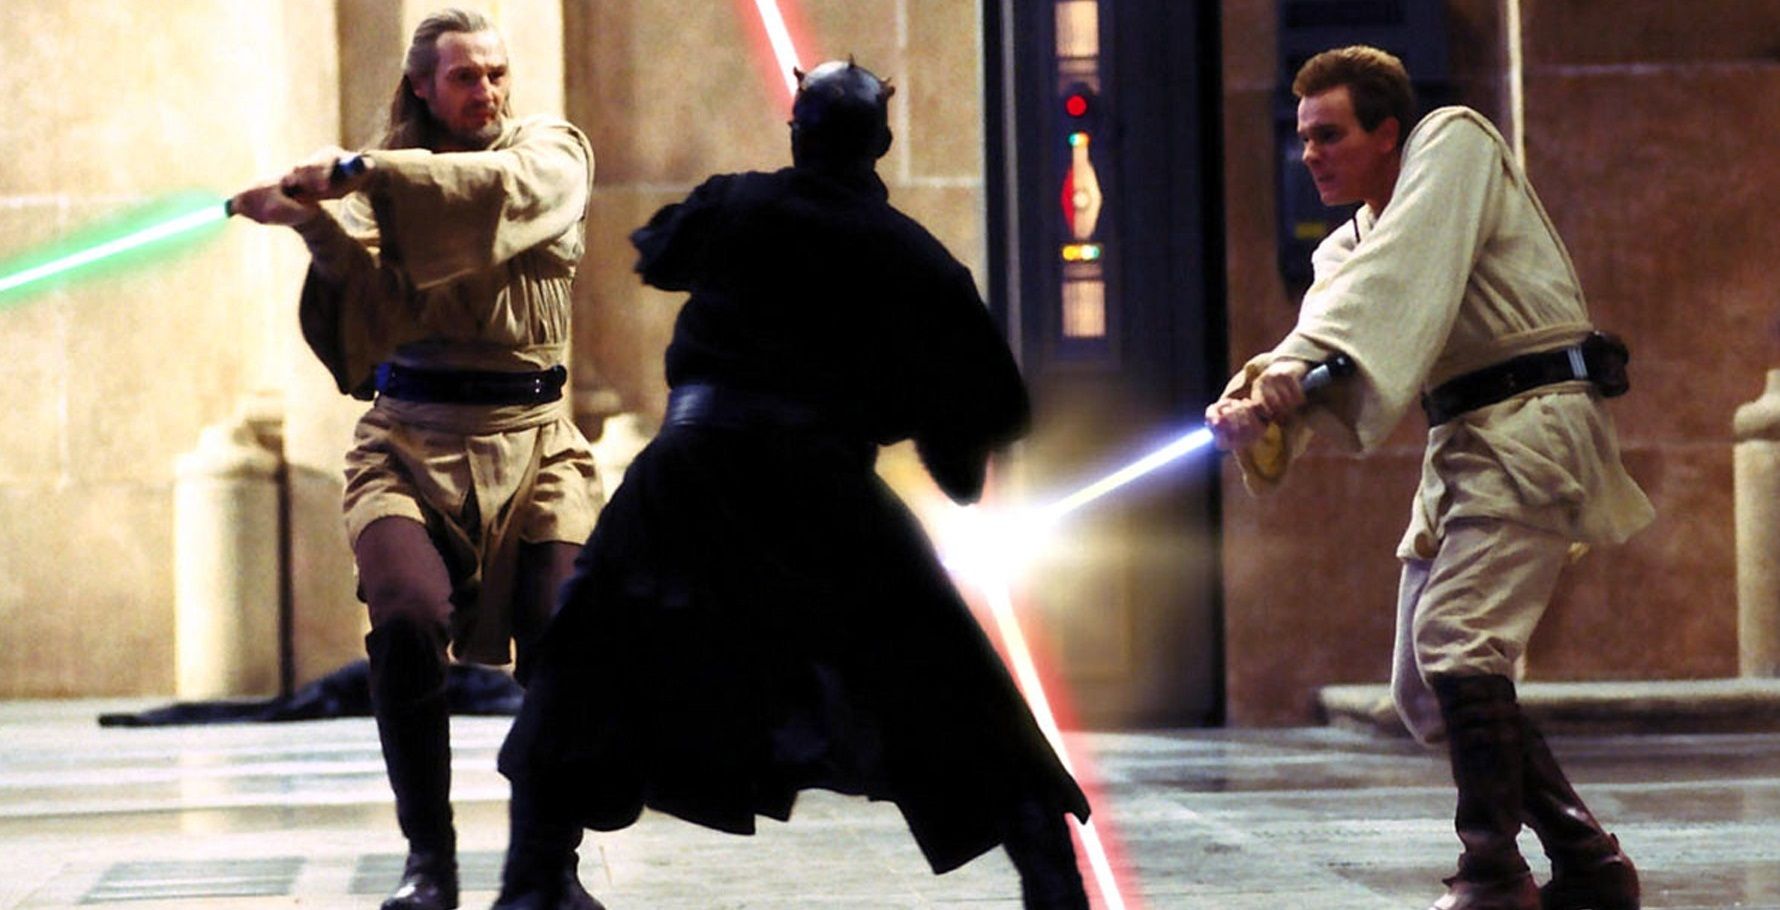 10 Profound Quotes From Star Wars: Episode 1 The Phantom Menace